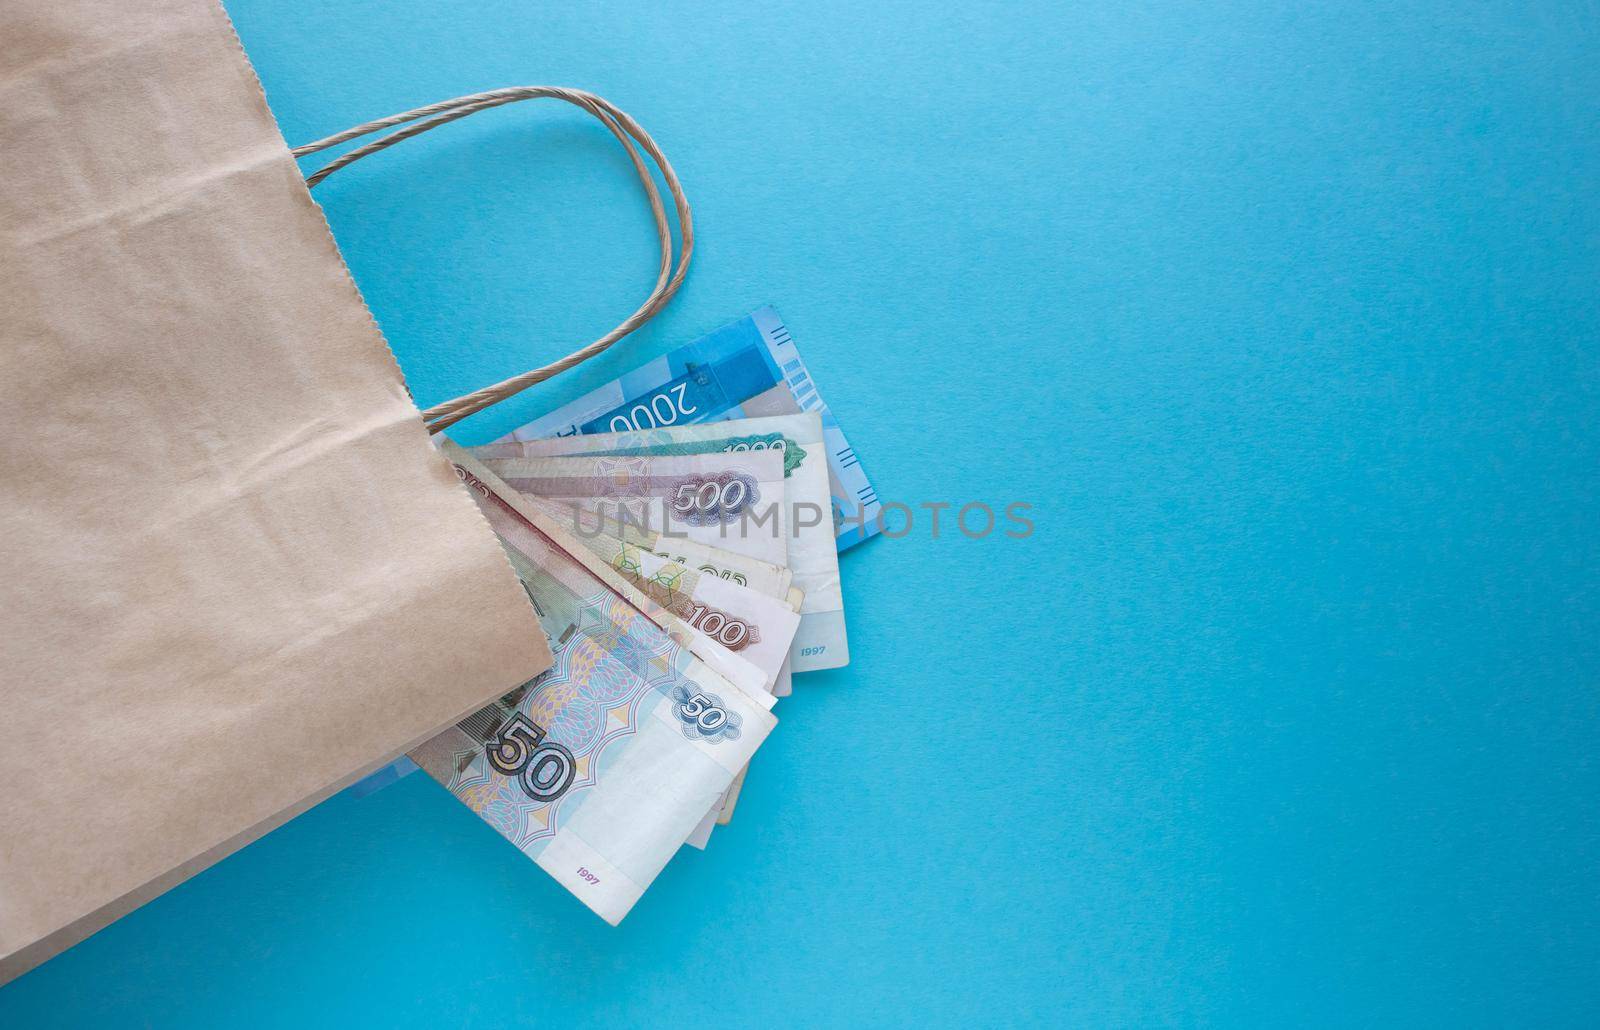 A bundle of Russian money and a paper bag on a blue background.